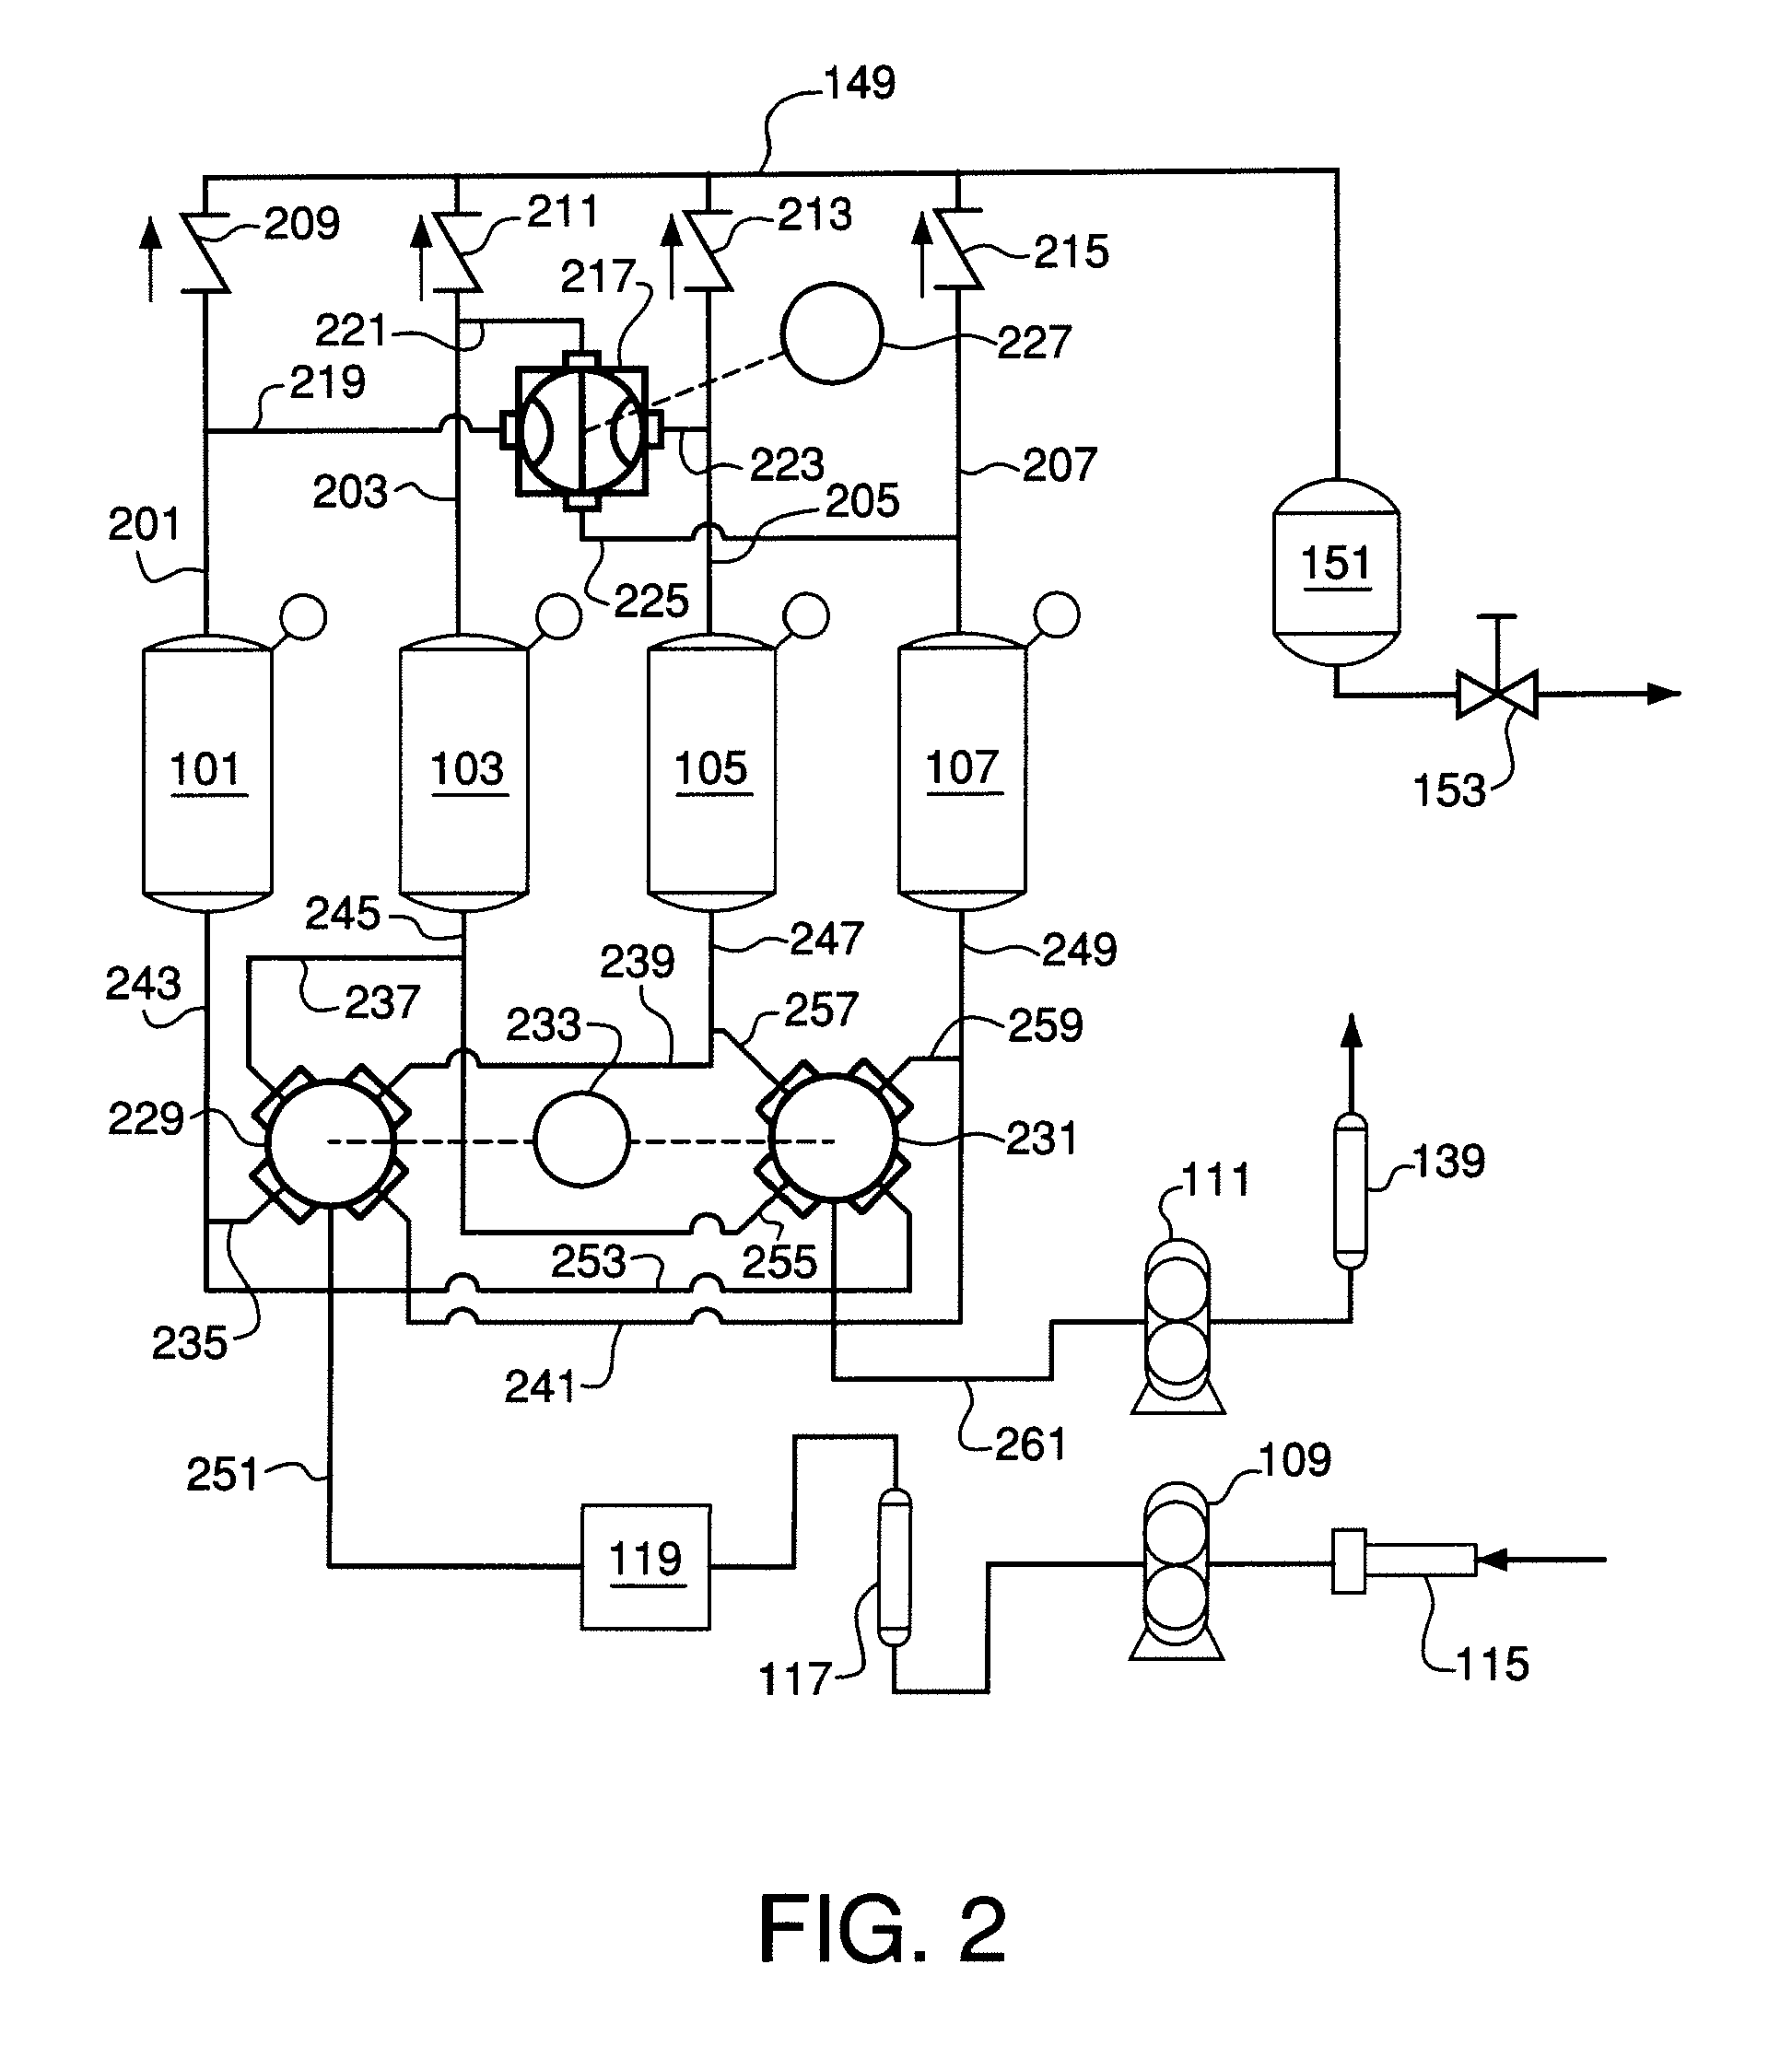 Pressure swing adsorption system with indexed rotatable multi-port valves